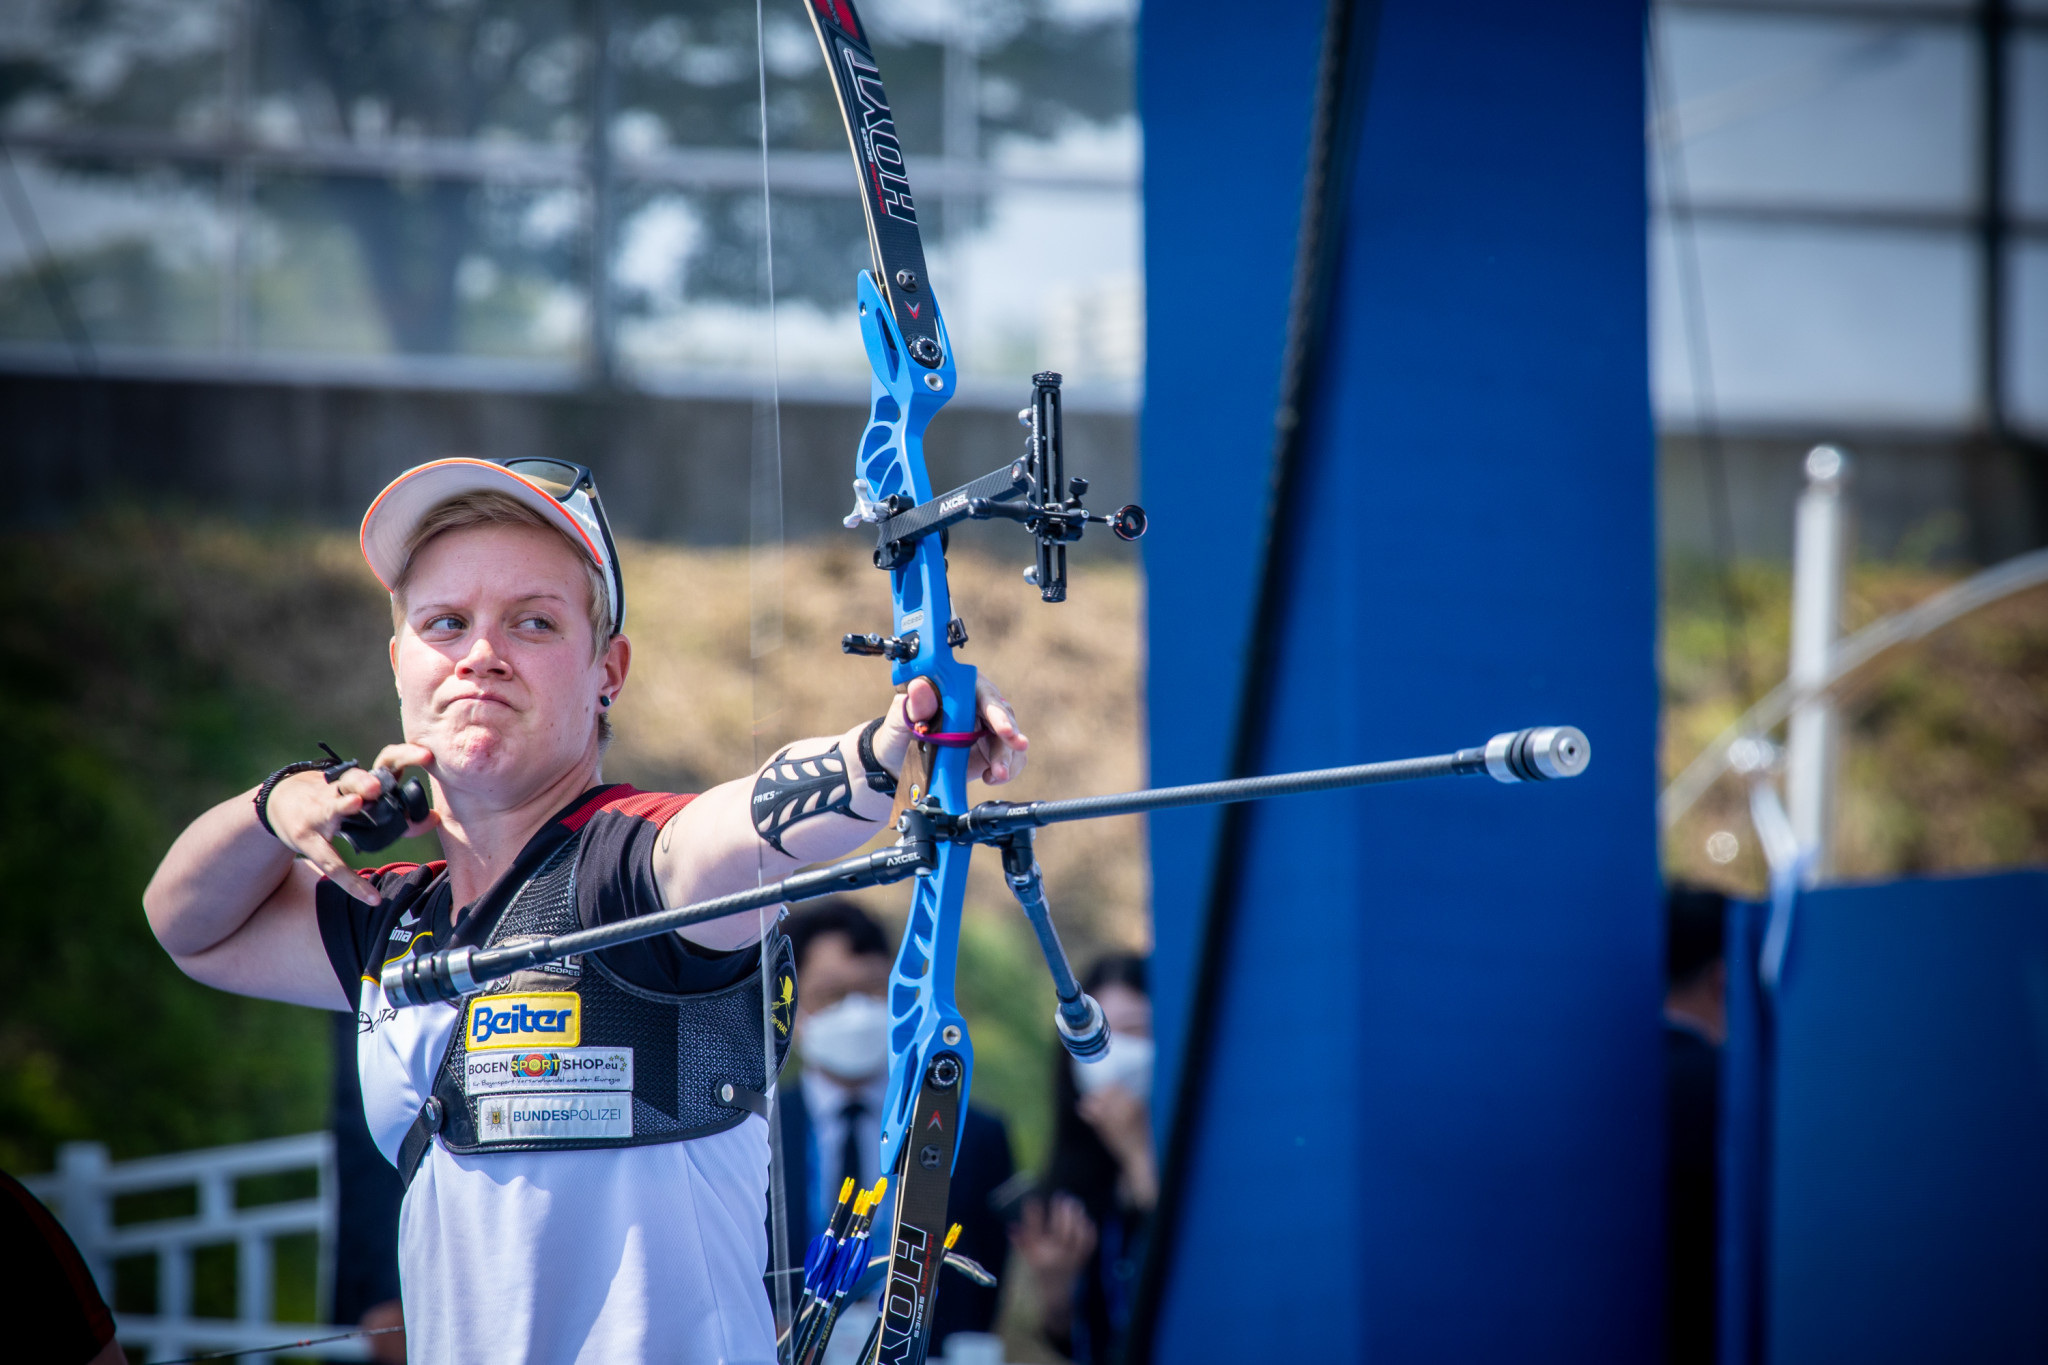 Michelle Kroppen helped Germany win recurve team bronze in Paris ©Getty Images